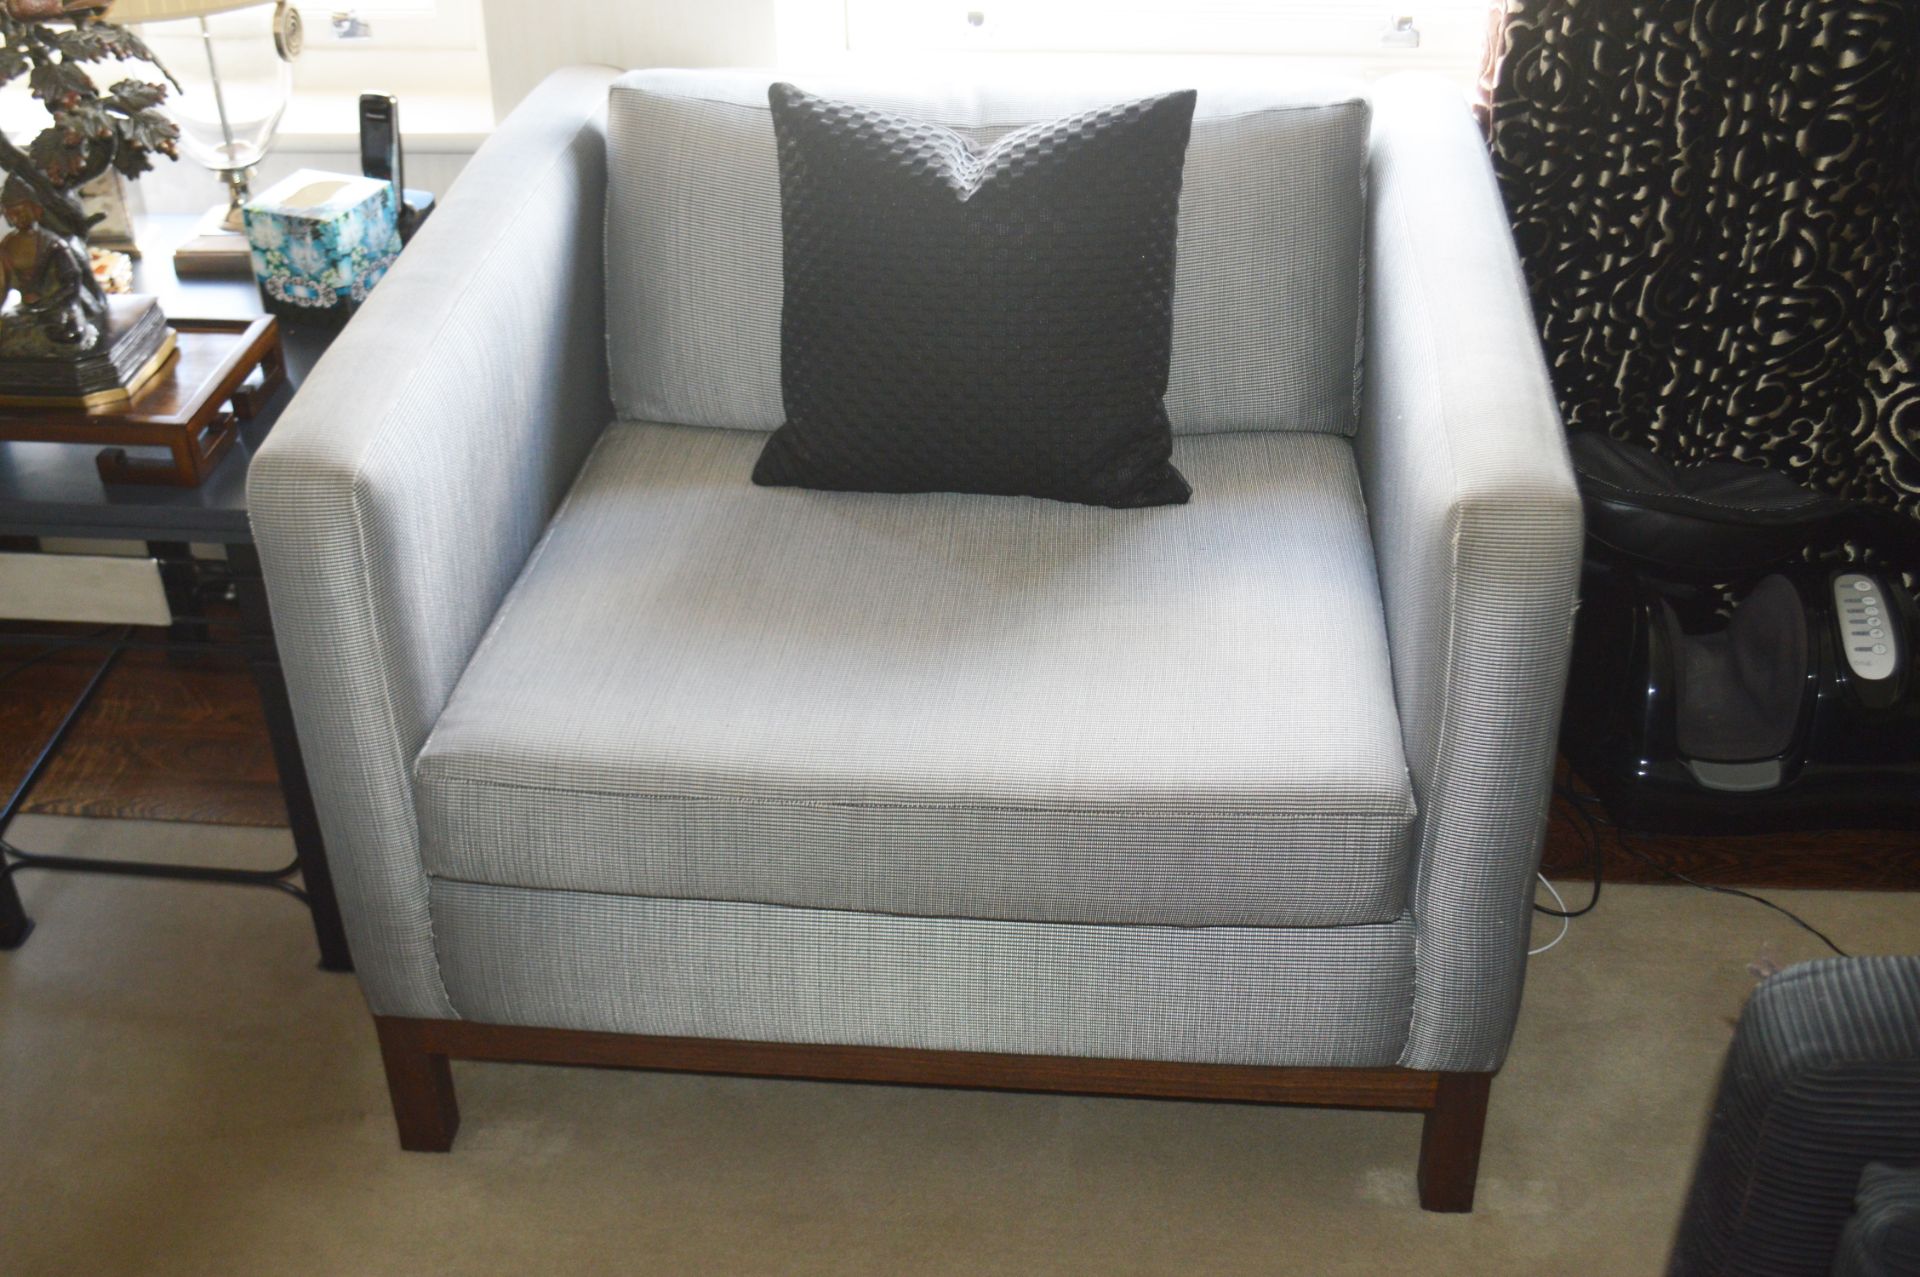 2  x Contemporary Armchairs - To Be Removed From An Exclusive Property In Bowdon  - CL691 - - Image 2 of 4